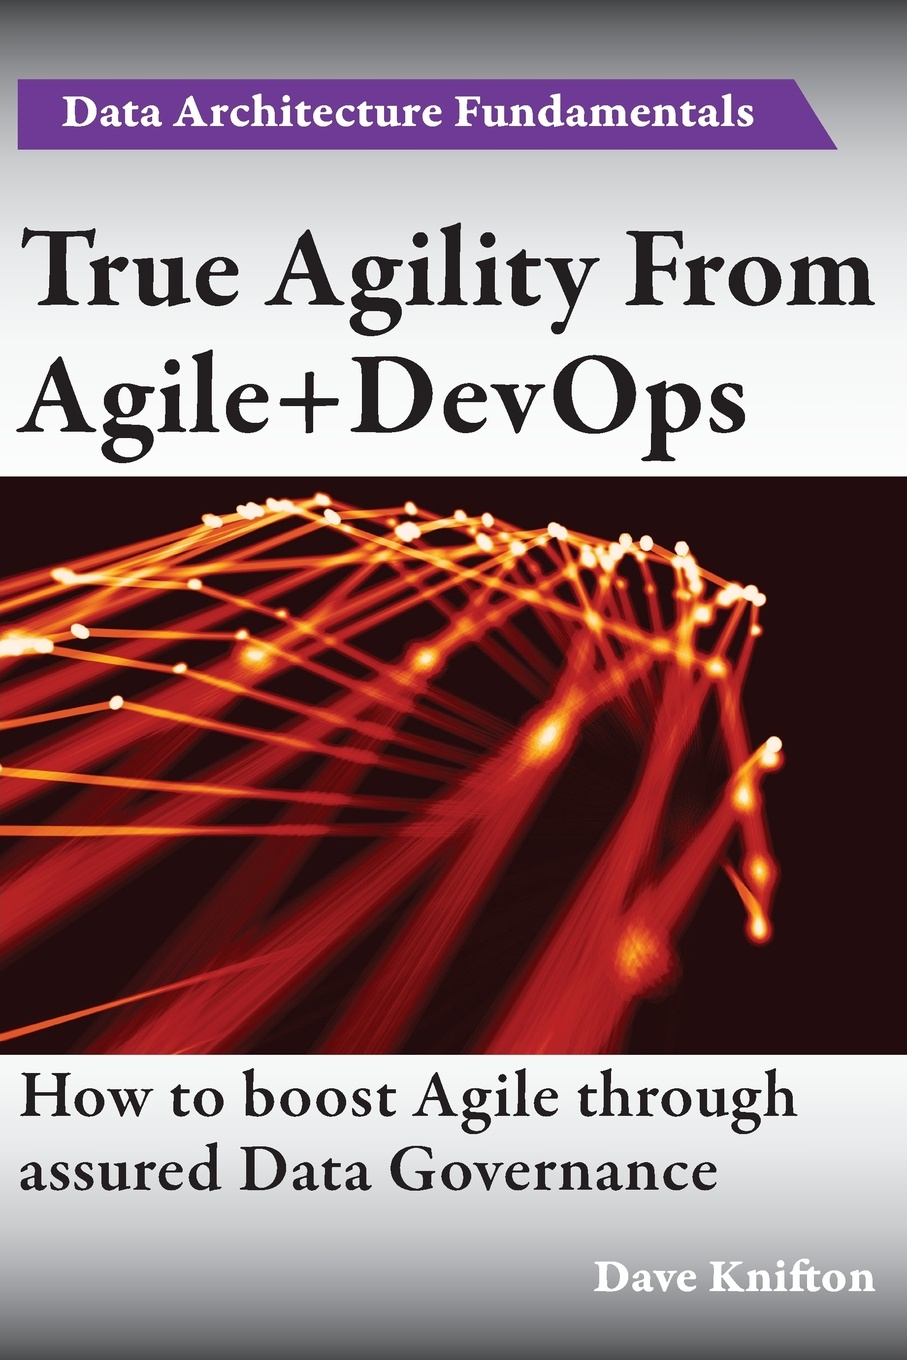 True Agility From Agile+DevOps. Assuring Data Governance And Boosting Agility